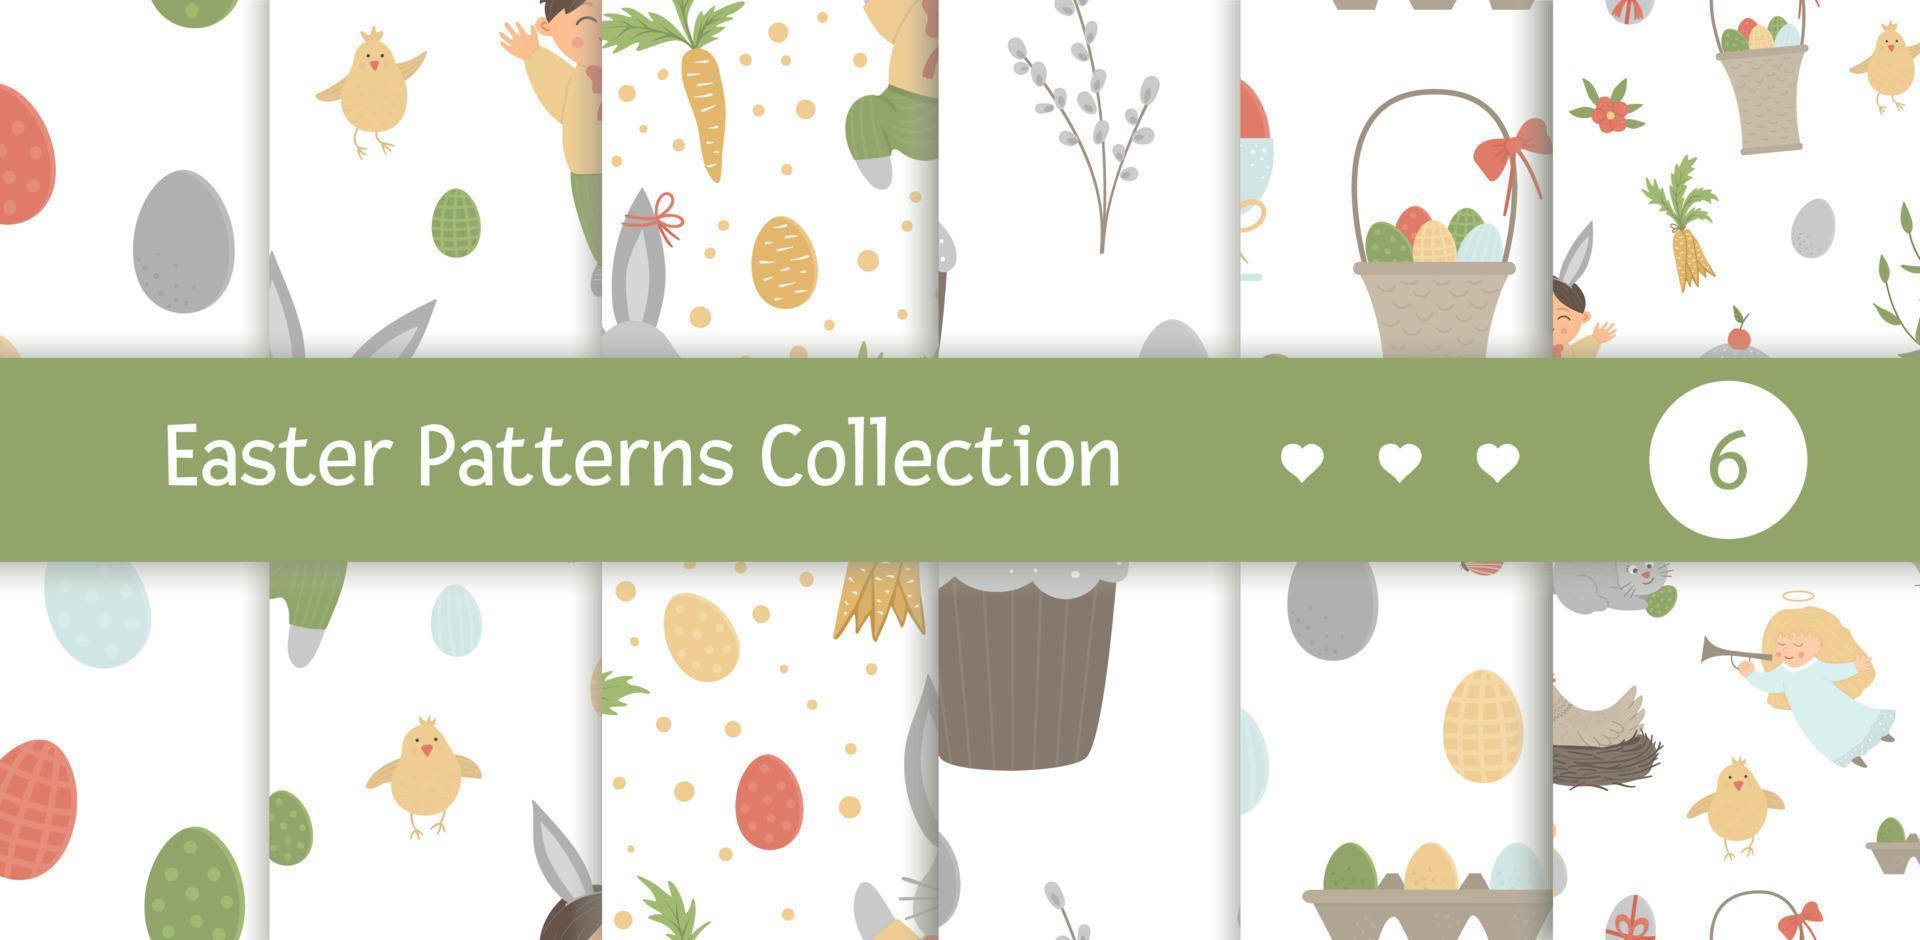 Vectors set of seamless patterns with design elements for Easter. Repeat backgrounds with cute bunny, children, colored eggs, chirping bird, chicks, baskets. Spring funny digital paper pack.